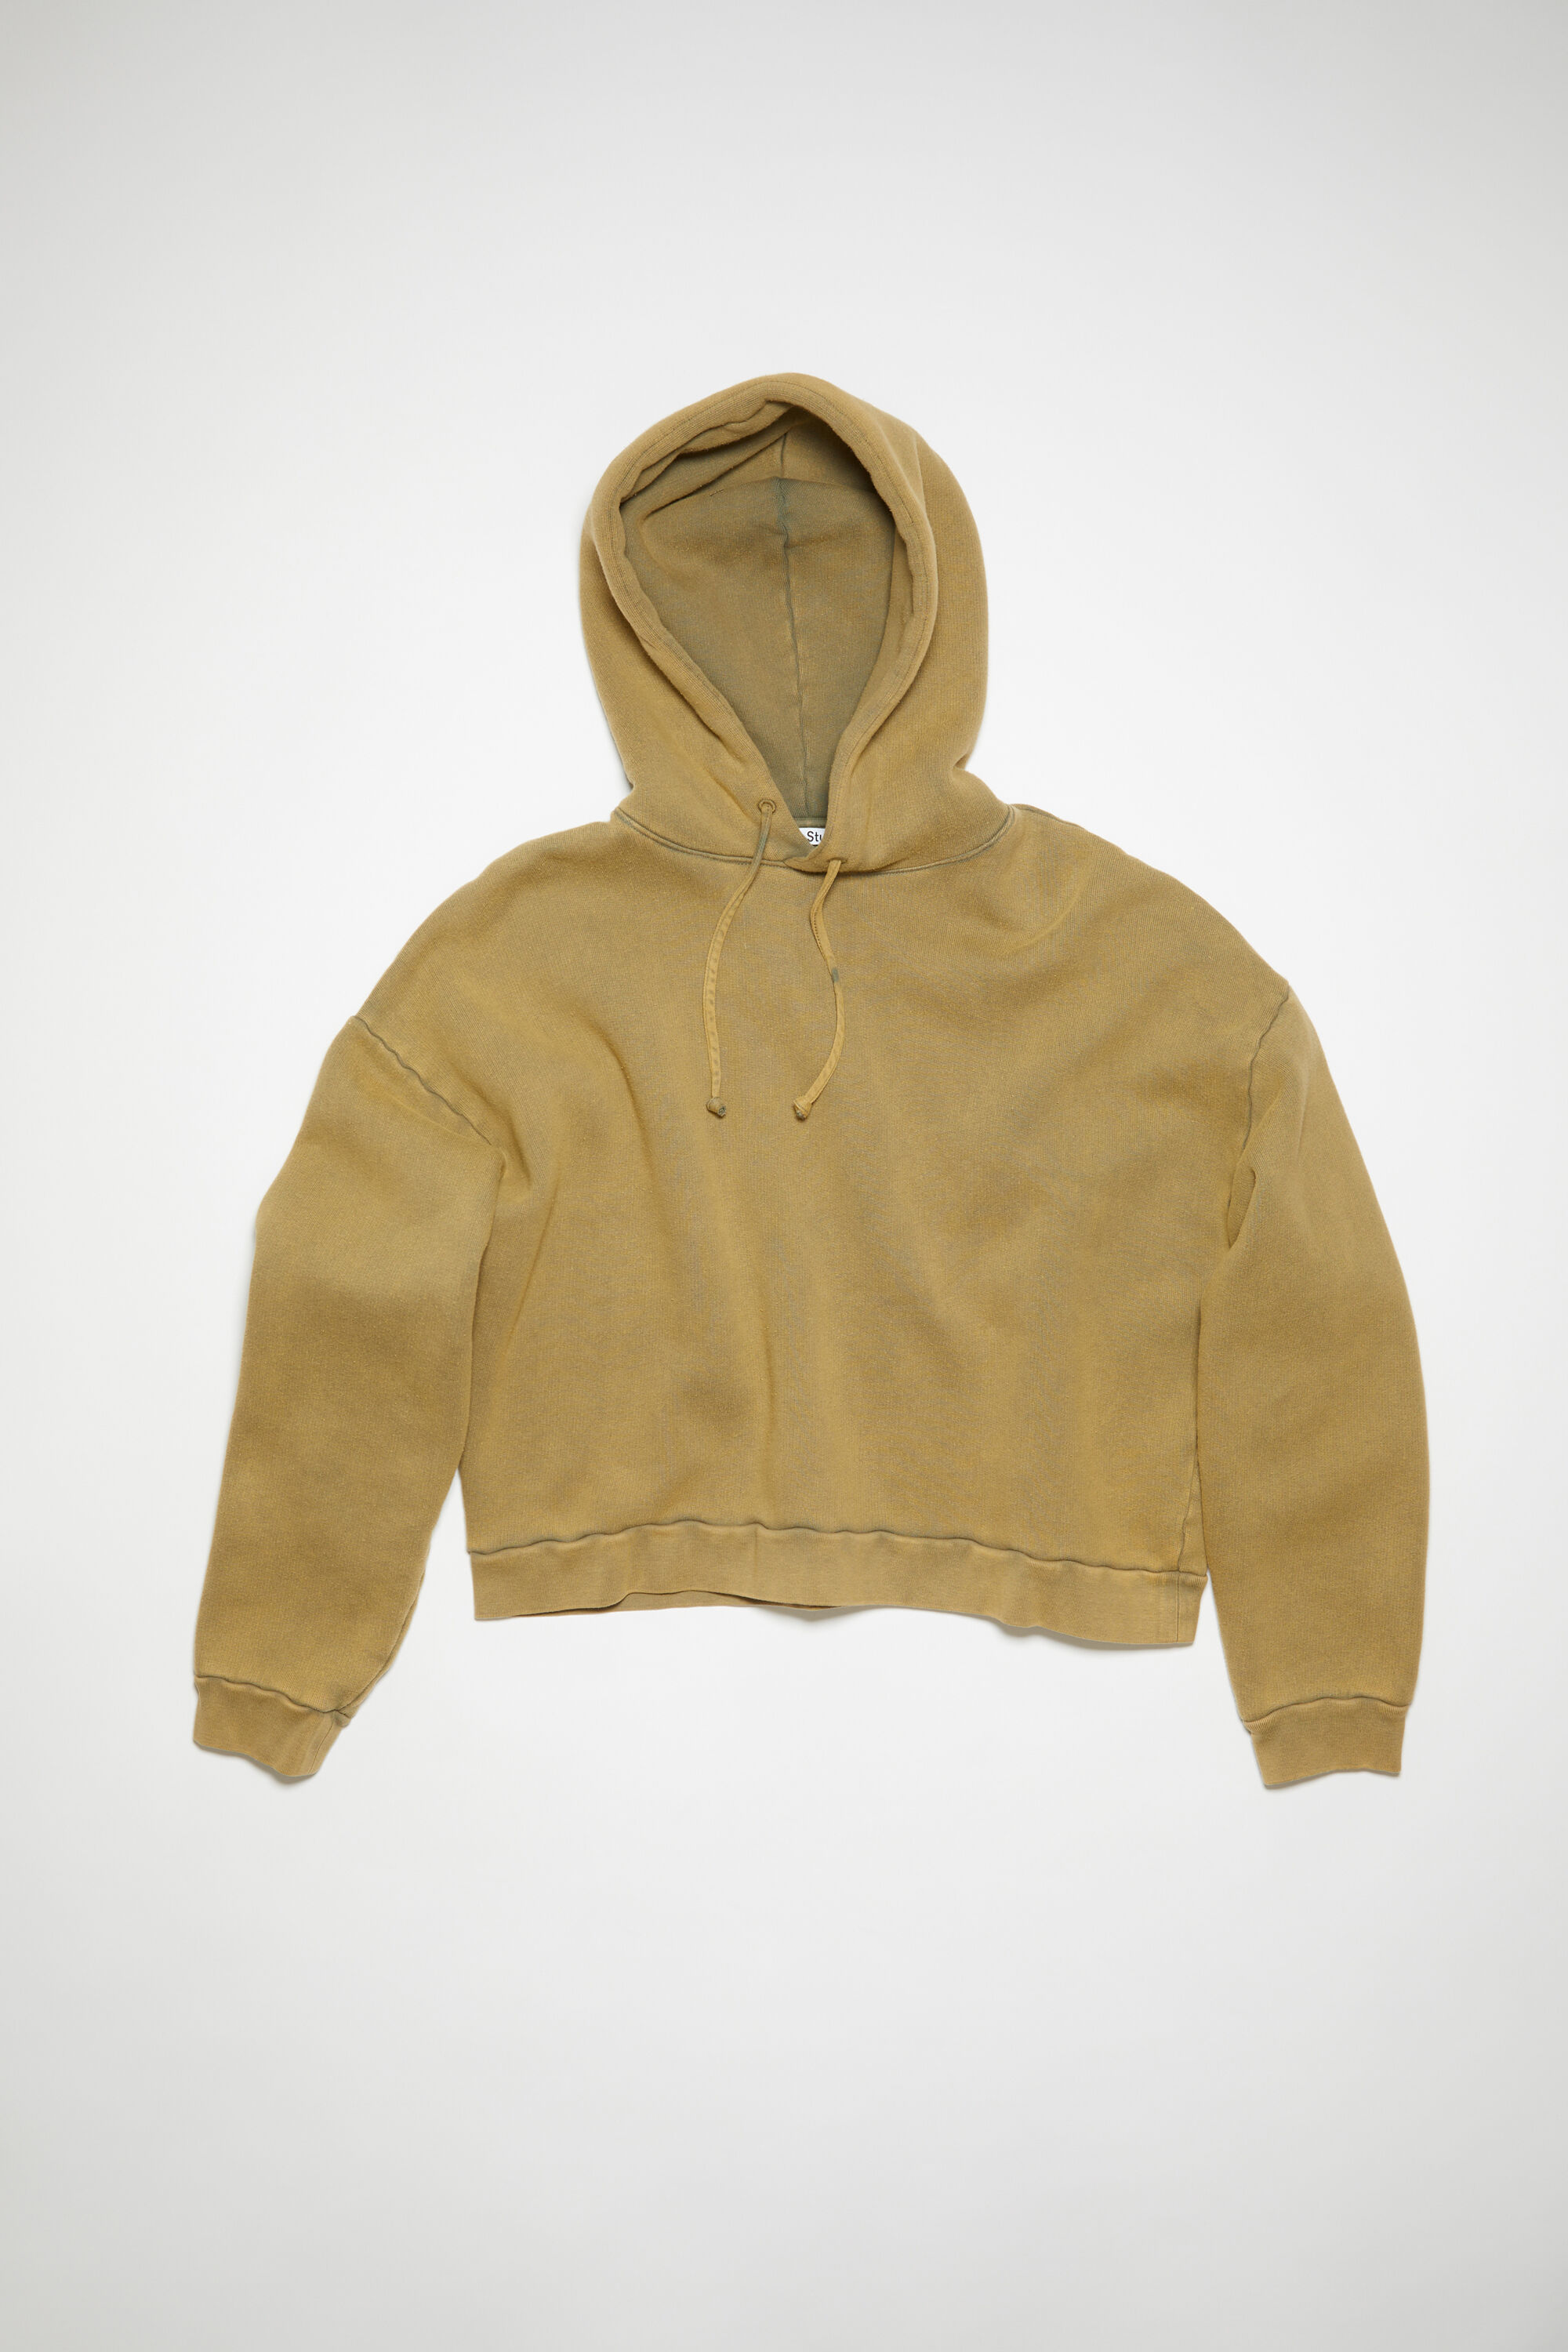 Acne Studios - Hooded sweater - Sage green